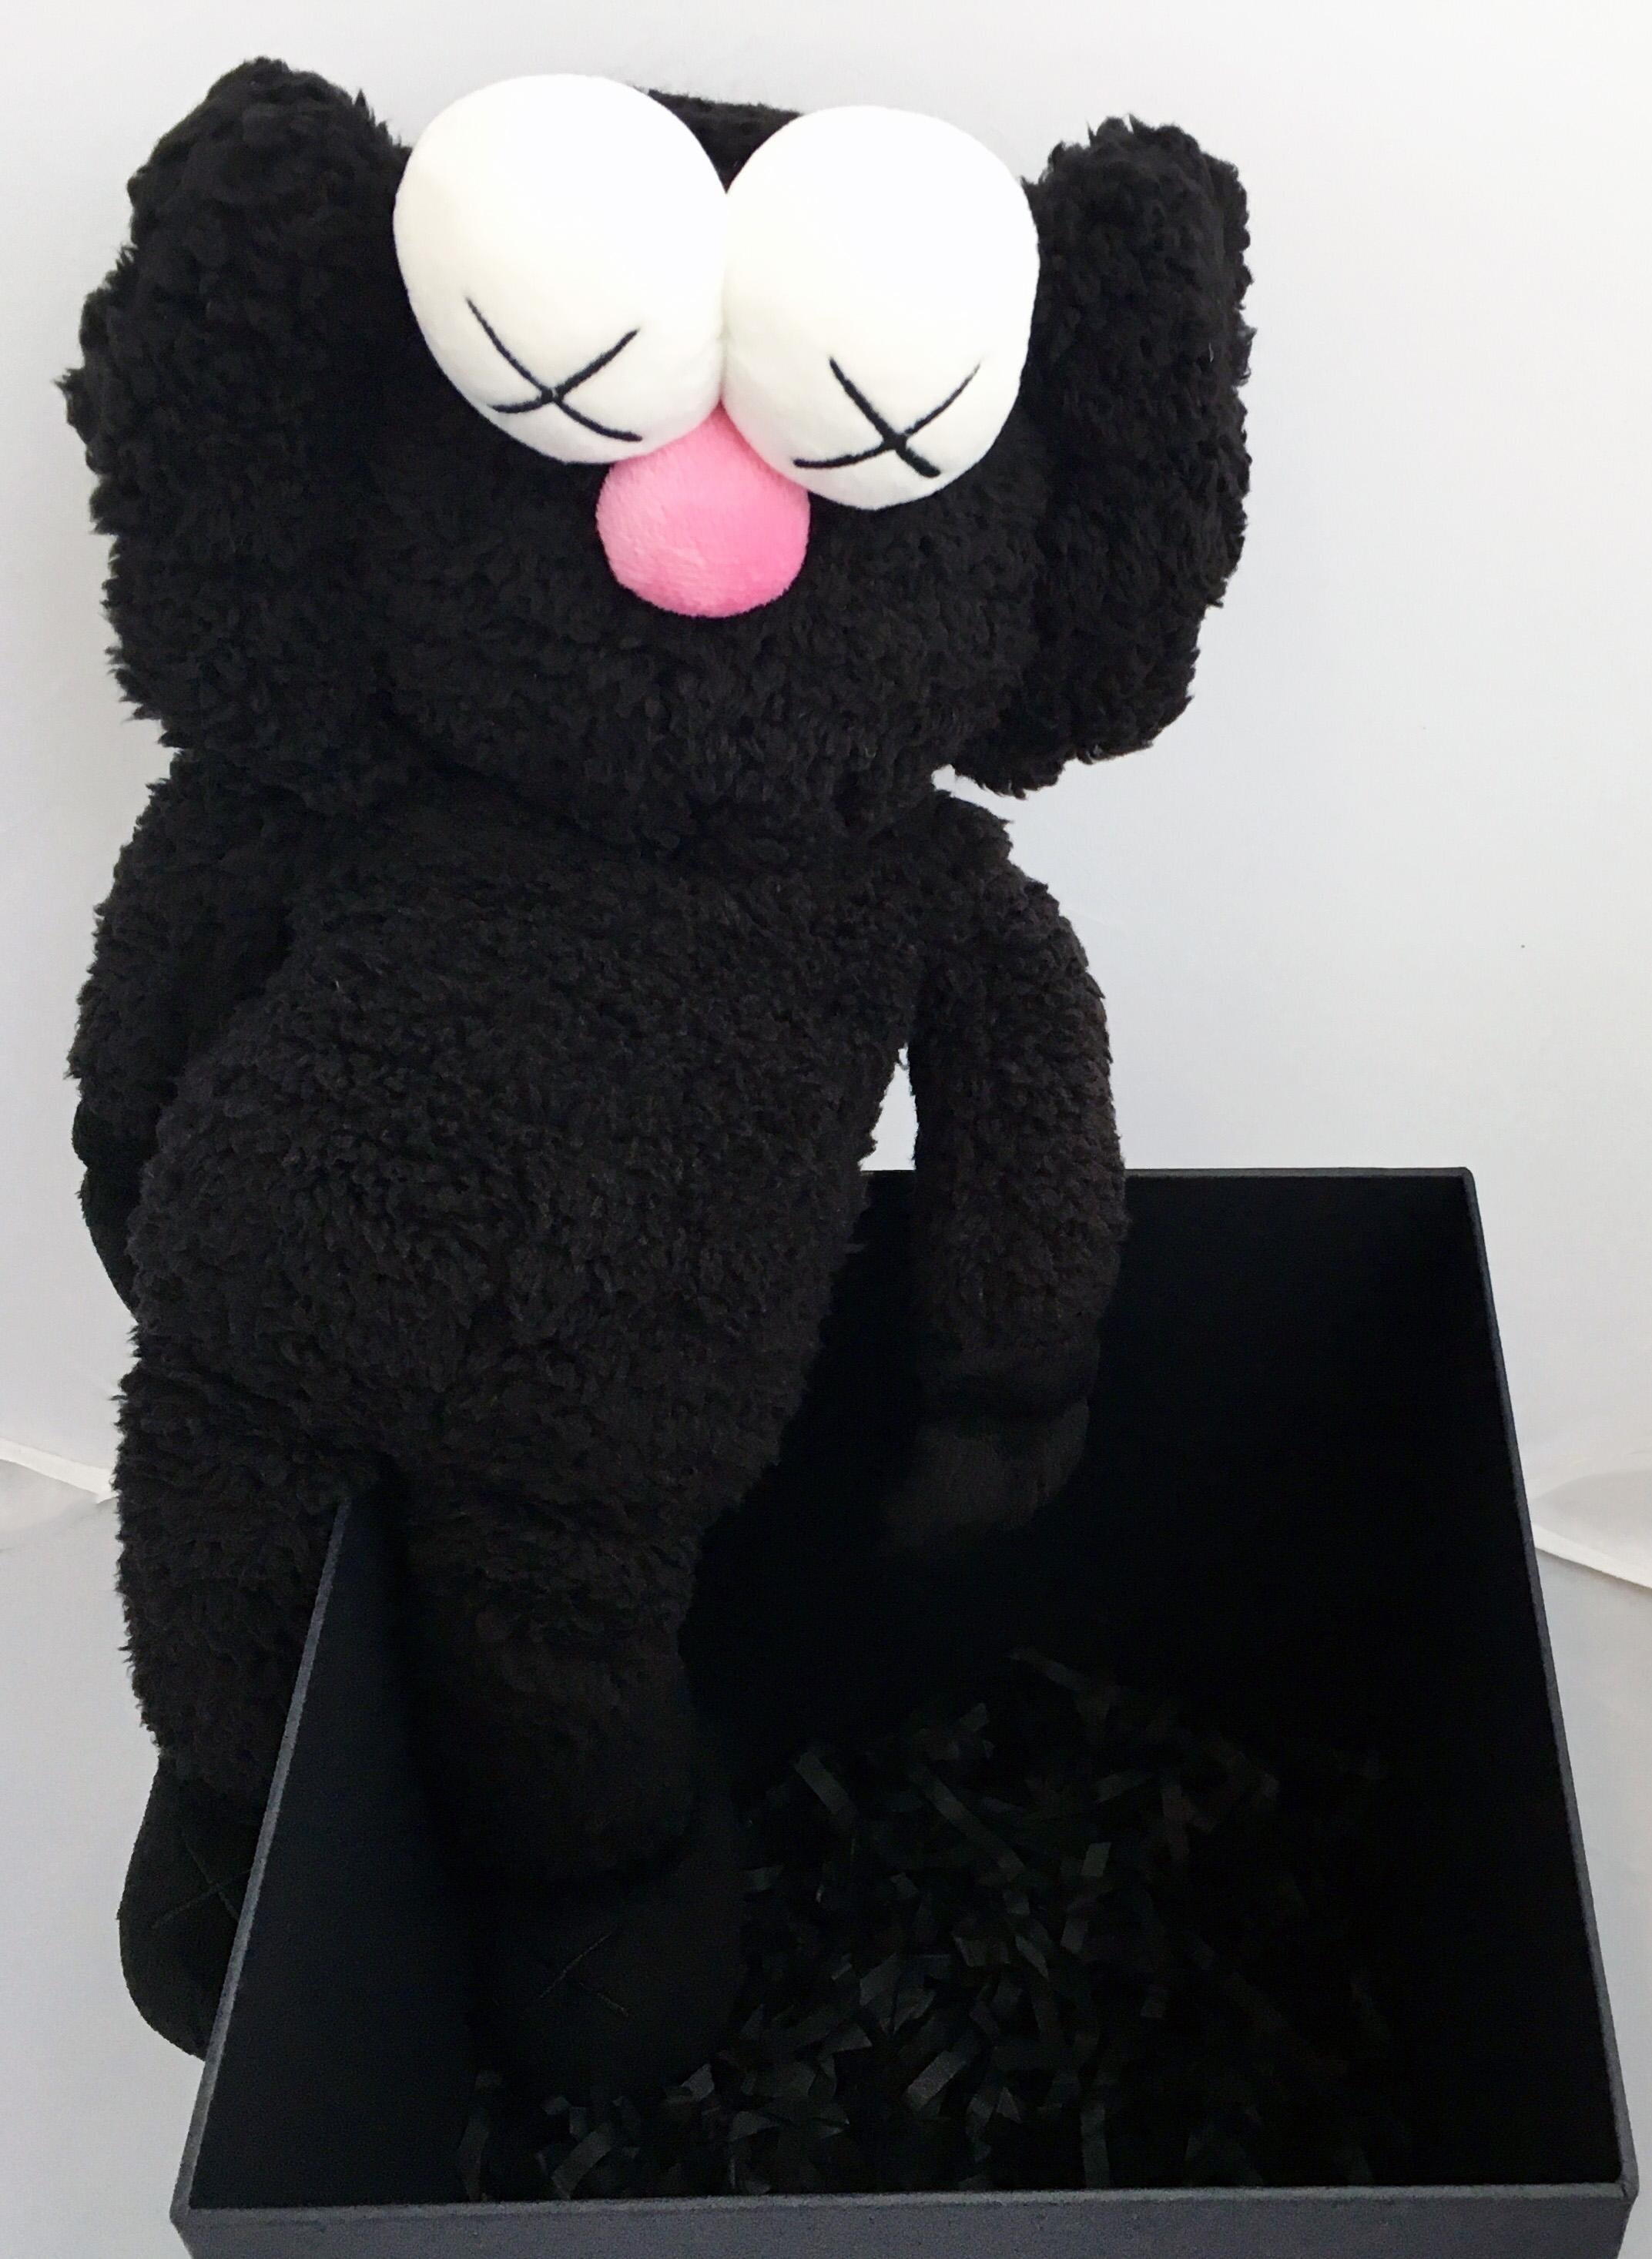 KAWS Black Plush BFF Companion 2016: 
New in its original packaging. Originally created in conjunction with the exhibition, KAWS: Where The End Starts at the Modern Art Museum of Fort Worth (2016). ThIs figurine has since sold out. As only 3,000